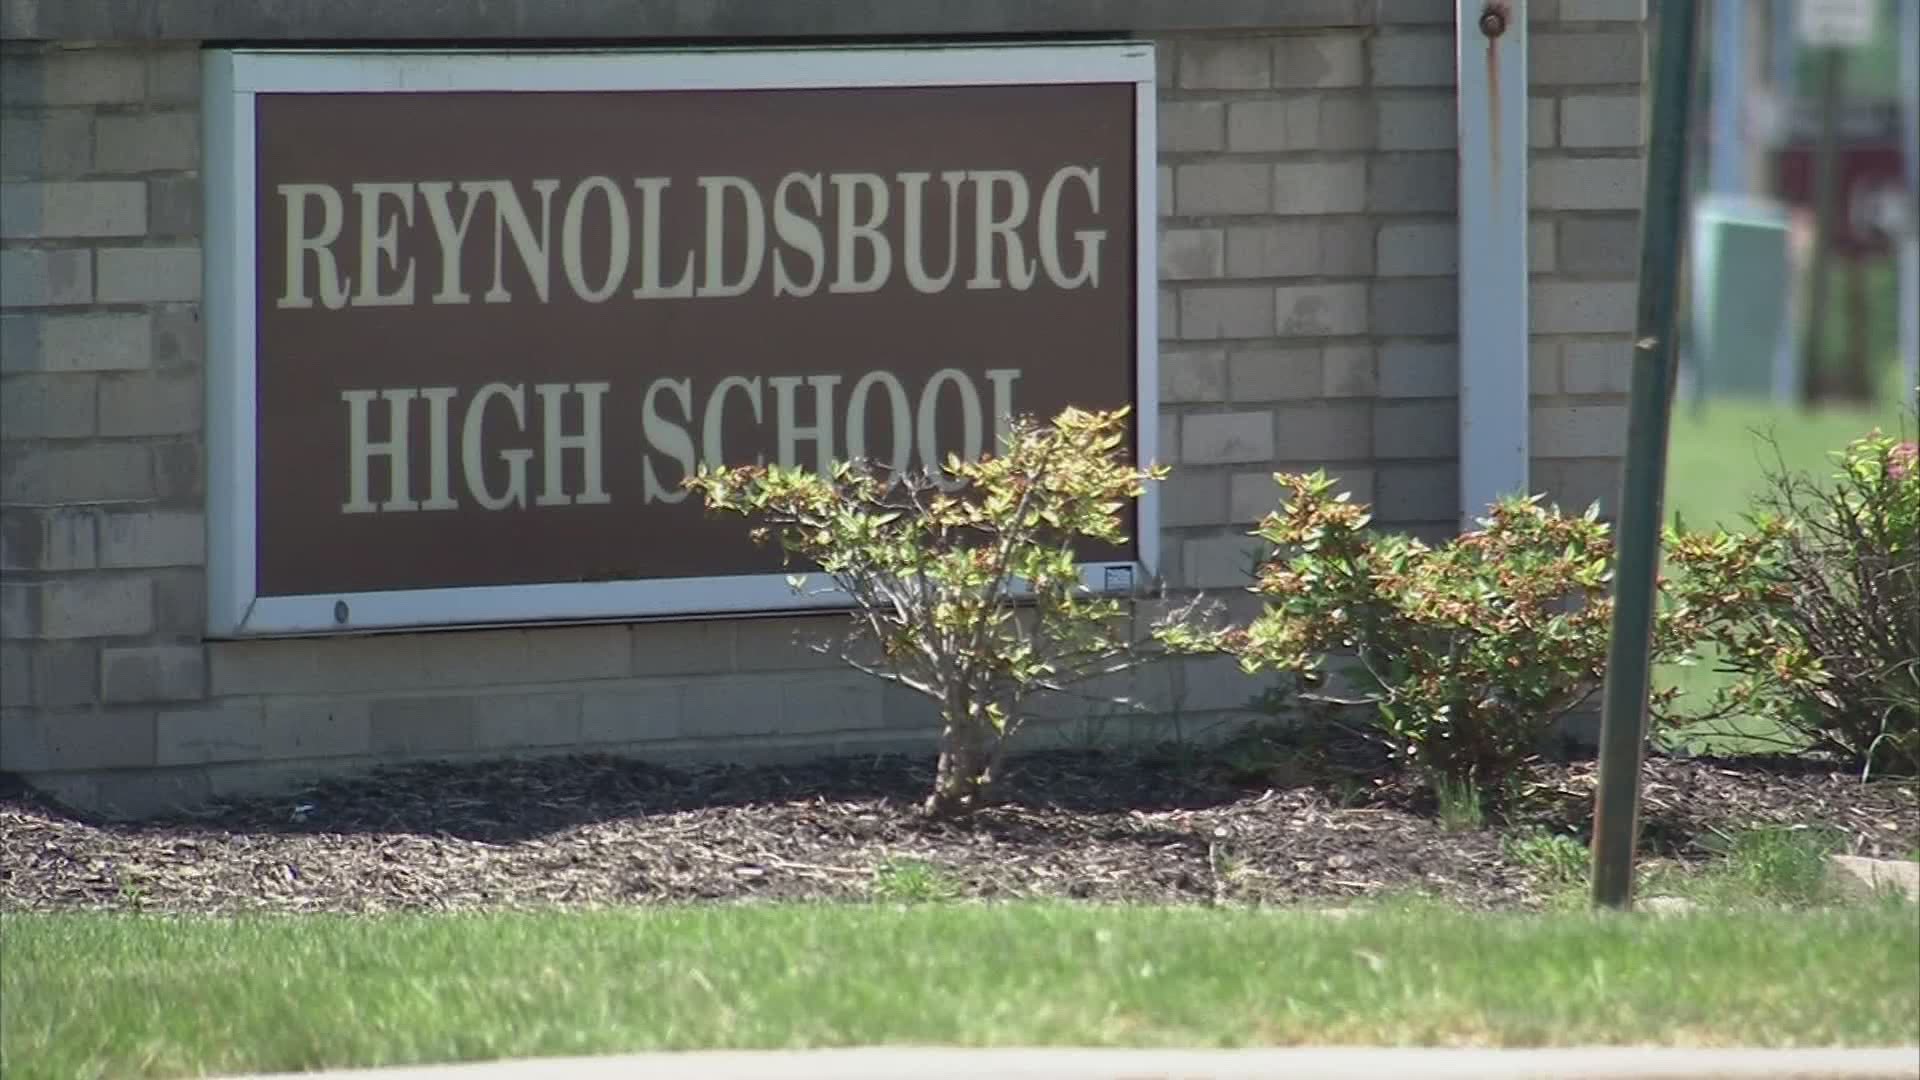 Reynoldsburg City Schools were one of the first districts to announce a full virtual return.